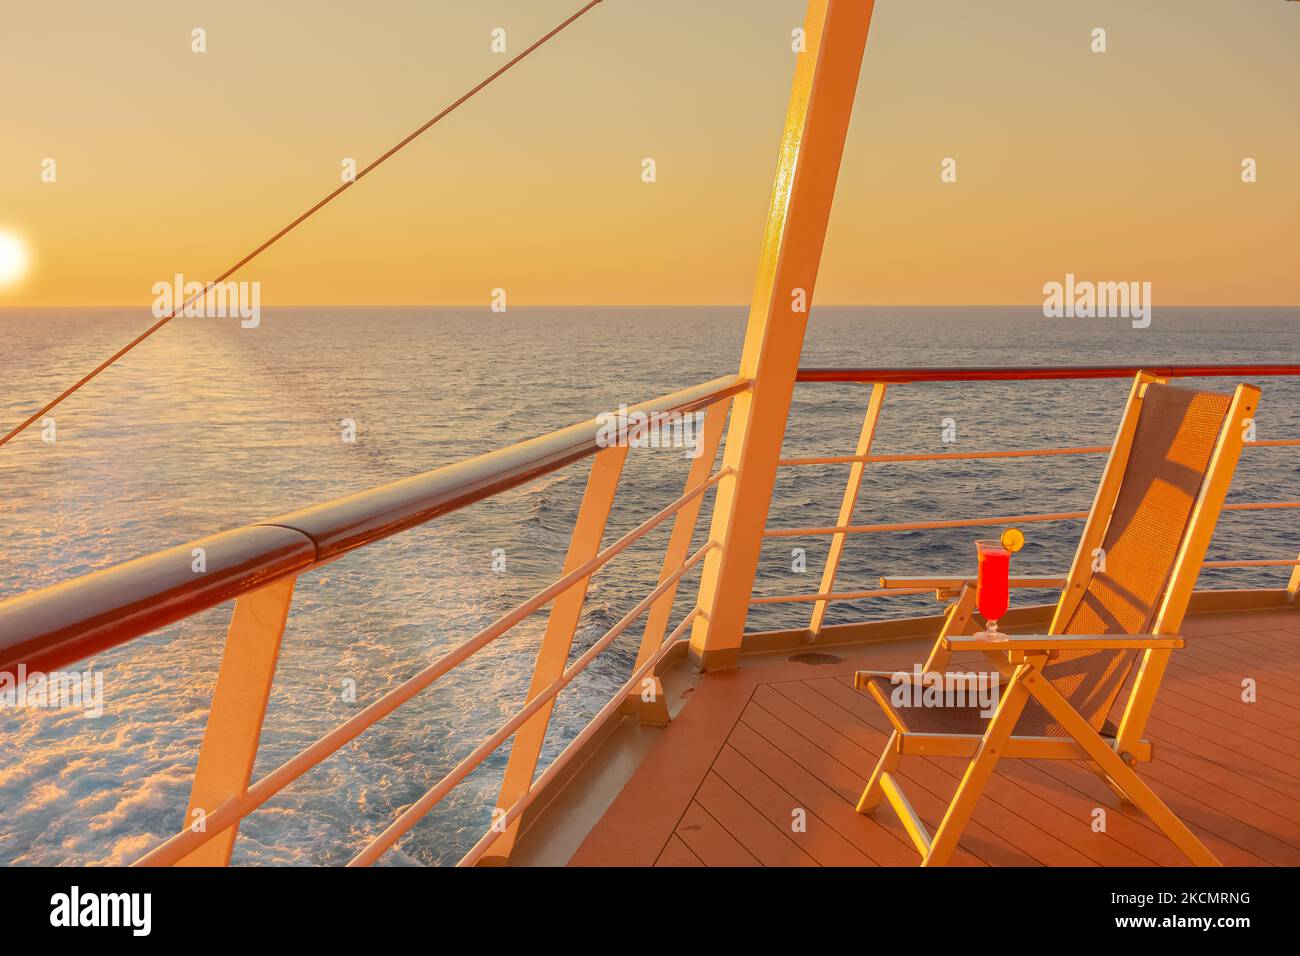 View of a strawberry daiquiri cocktail on the deck of a cruise ship at sunset in the wake of the cruise ship. View from the stern of the ship. Stock Photo